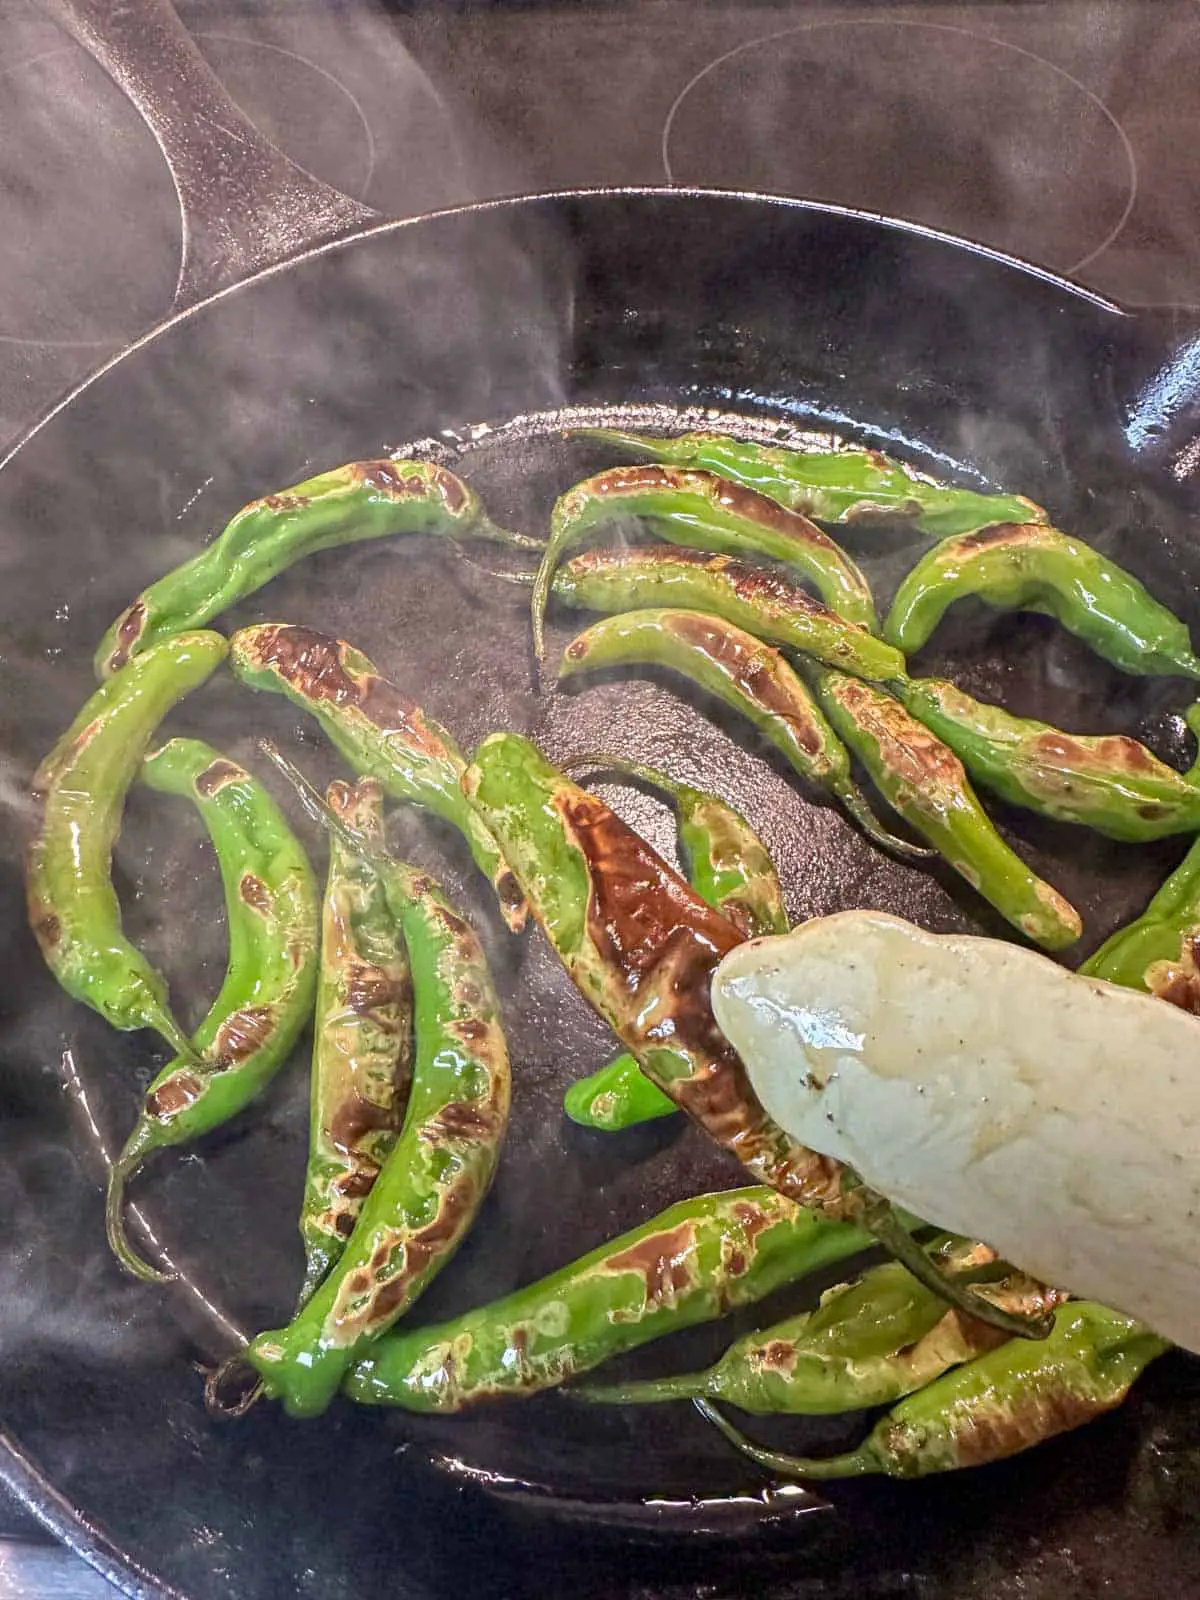 Blistered shishito peppers in a cast iron pan with smoke. There is a blue pair of tongs holding one of the shishito peppers.